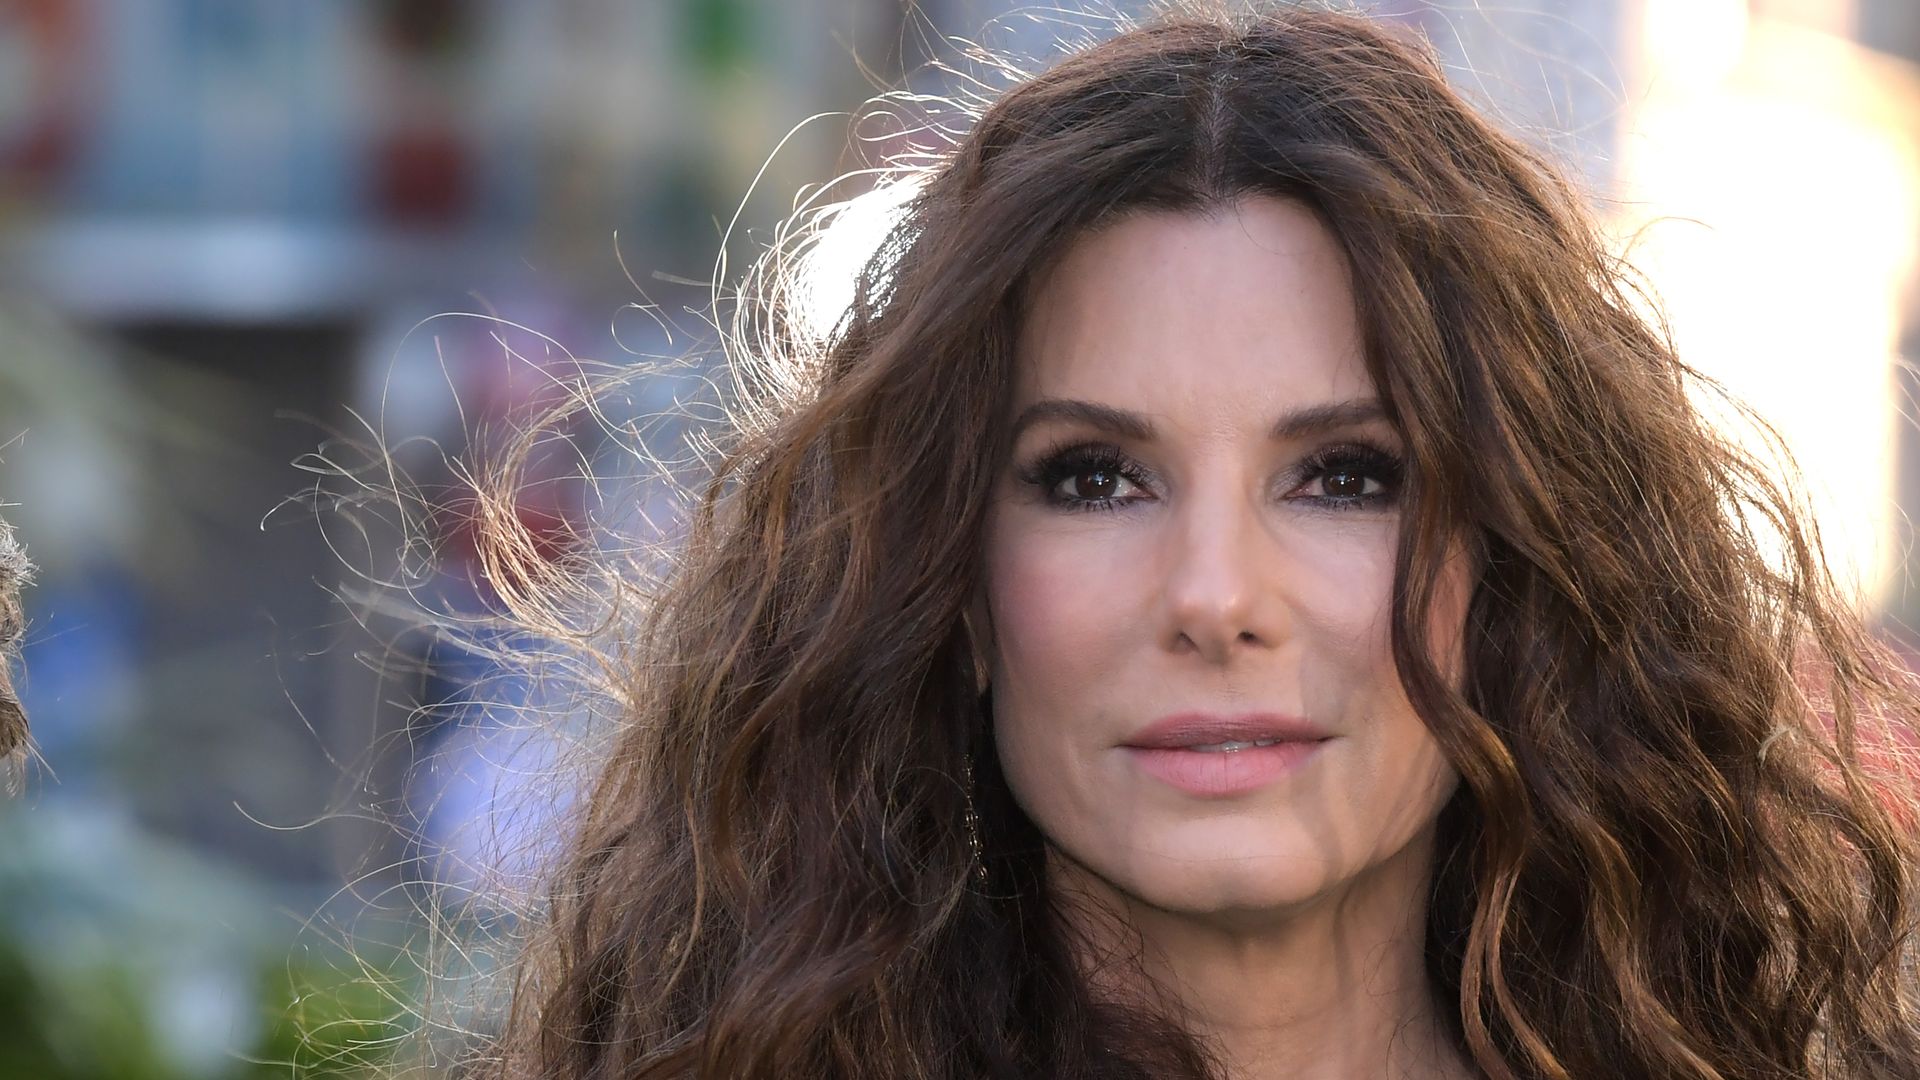 Sandra Bullock seen for the first time since partner's death – see photos